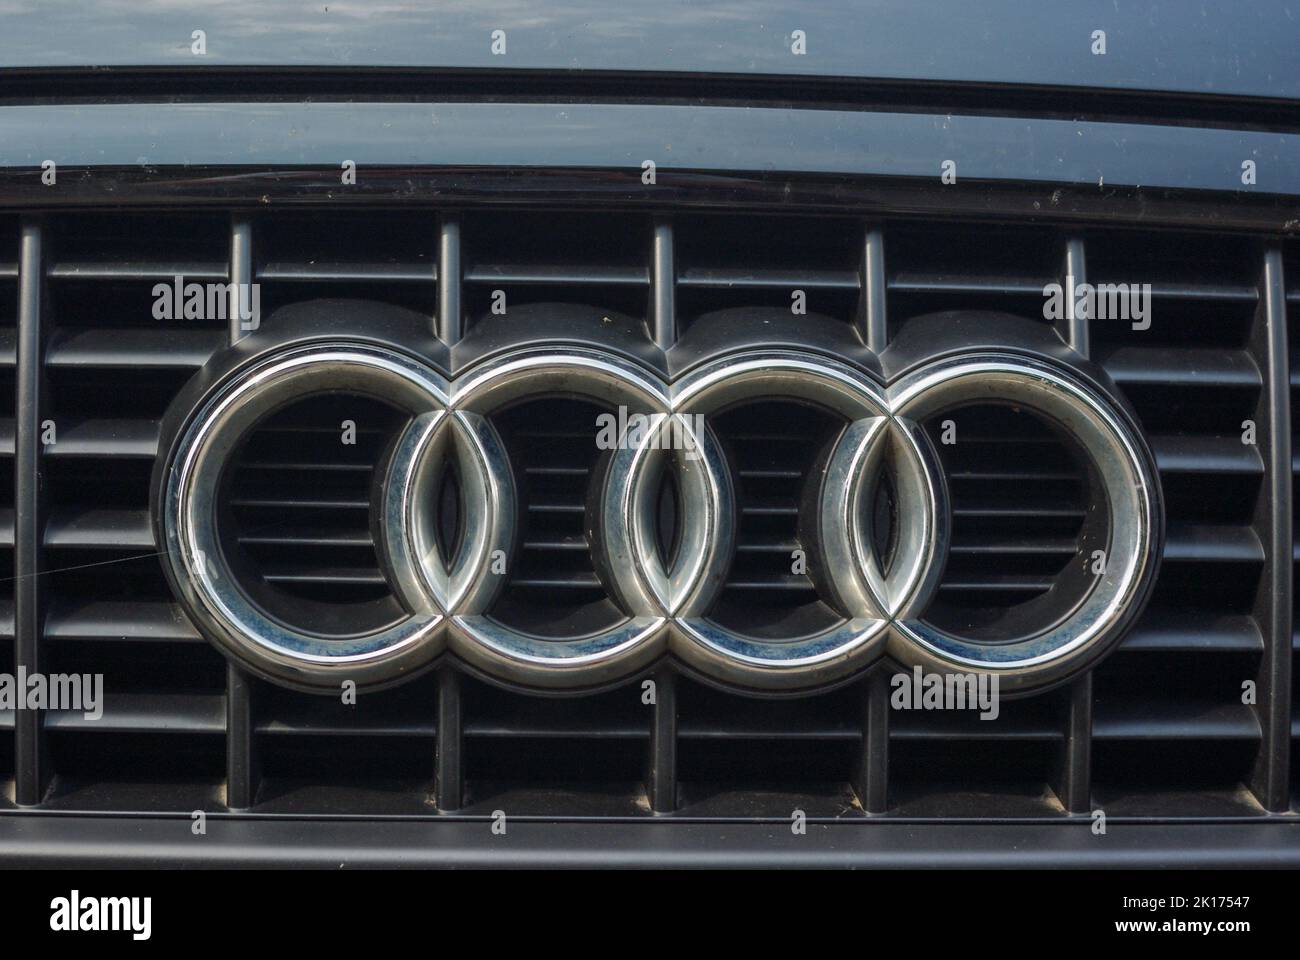 Close up of an Audi car badge made up of four interlocking rings on a radiator grill, UK Stock Photo